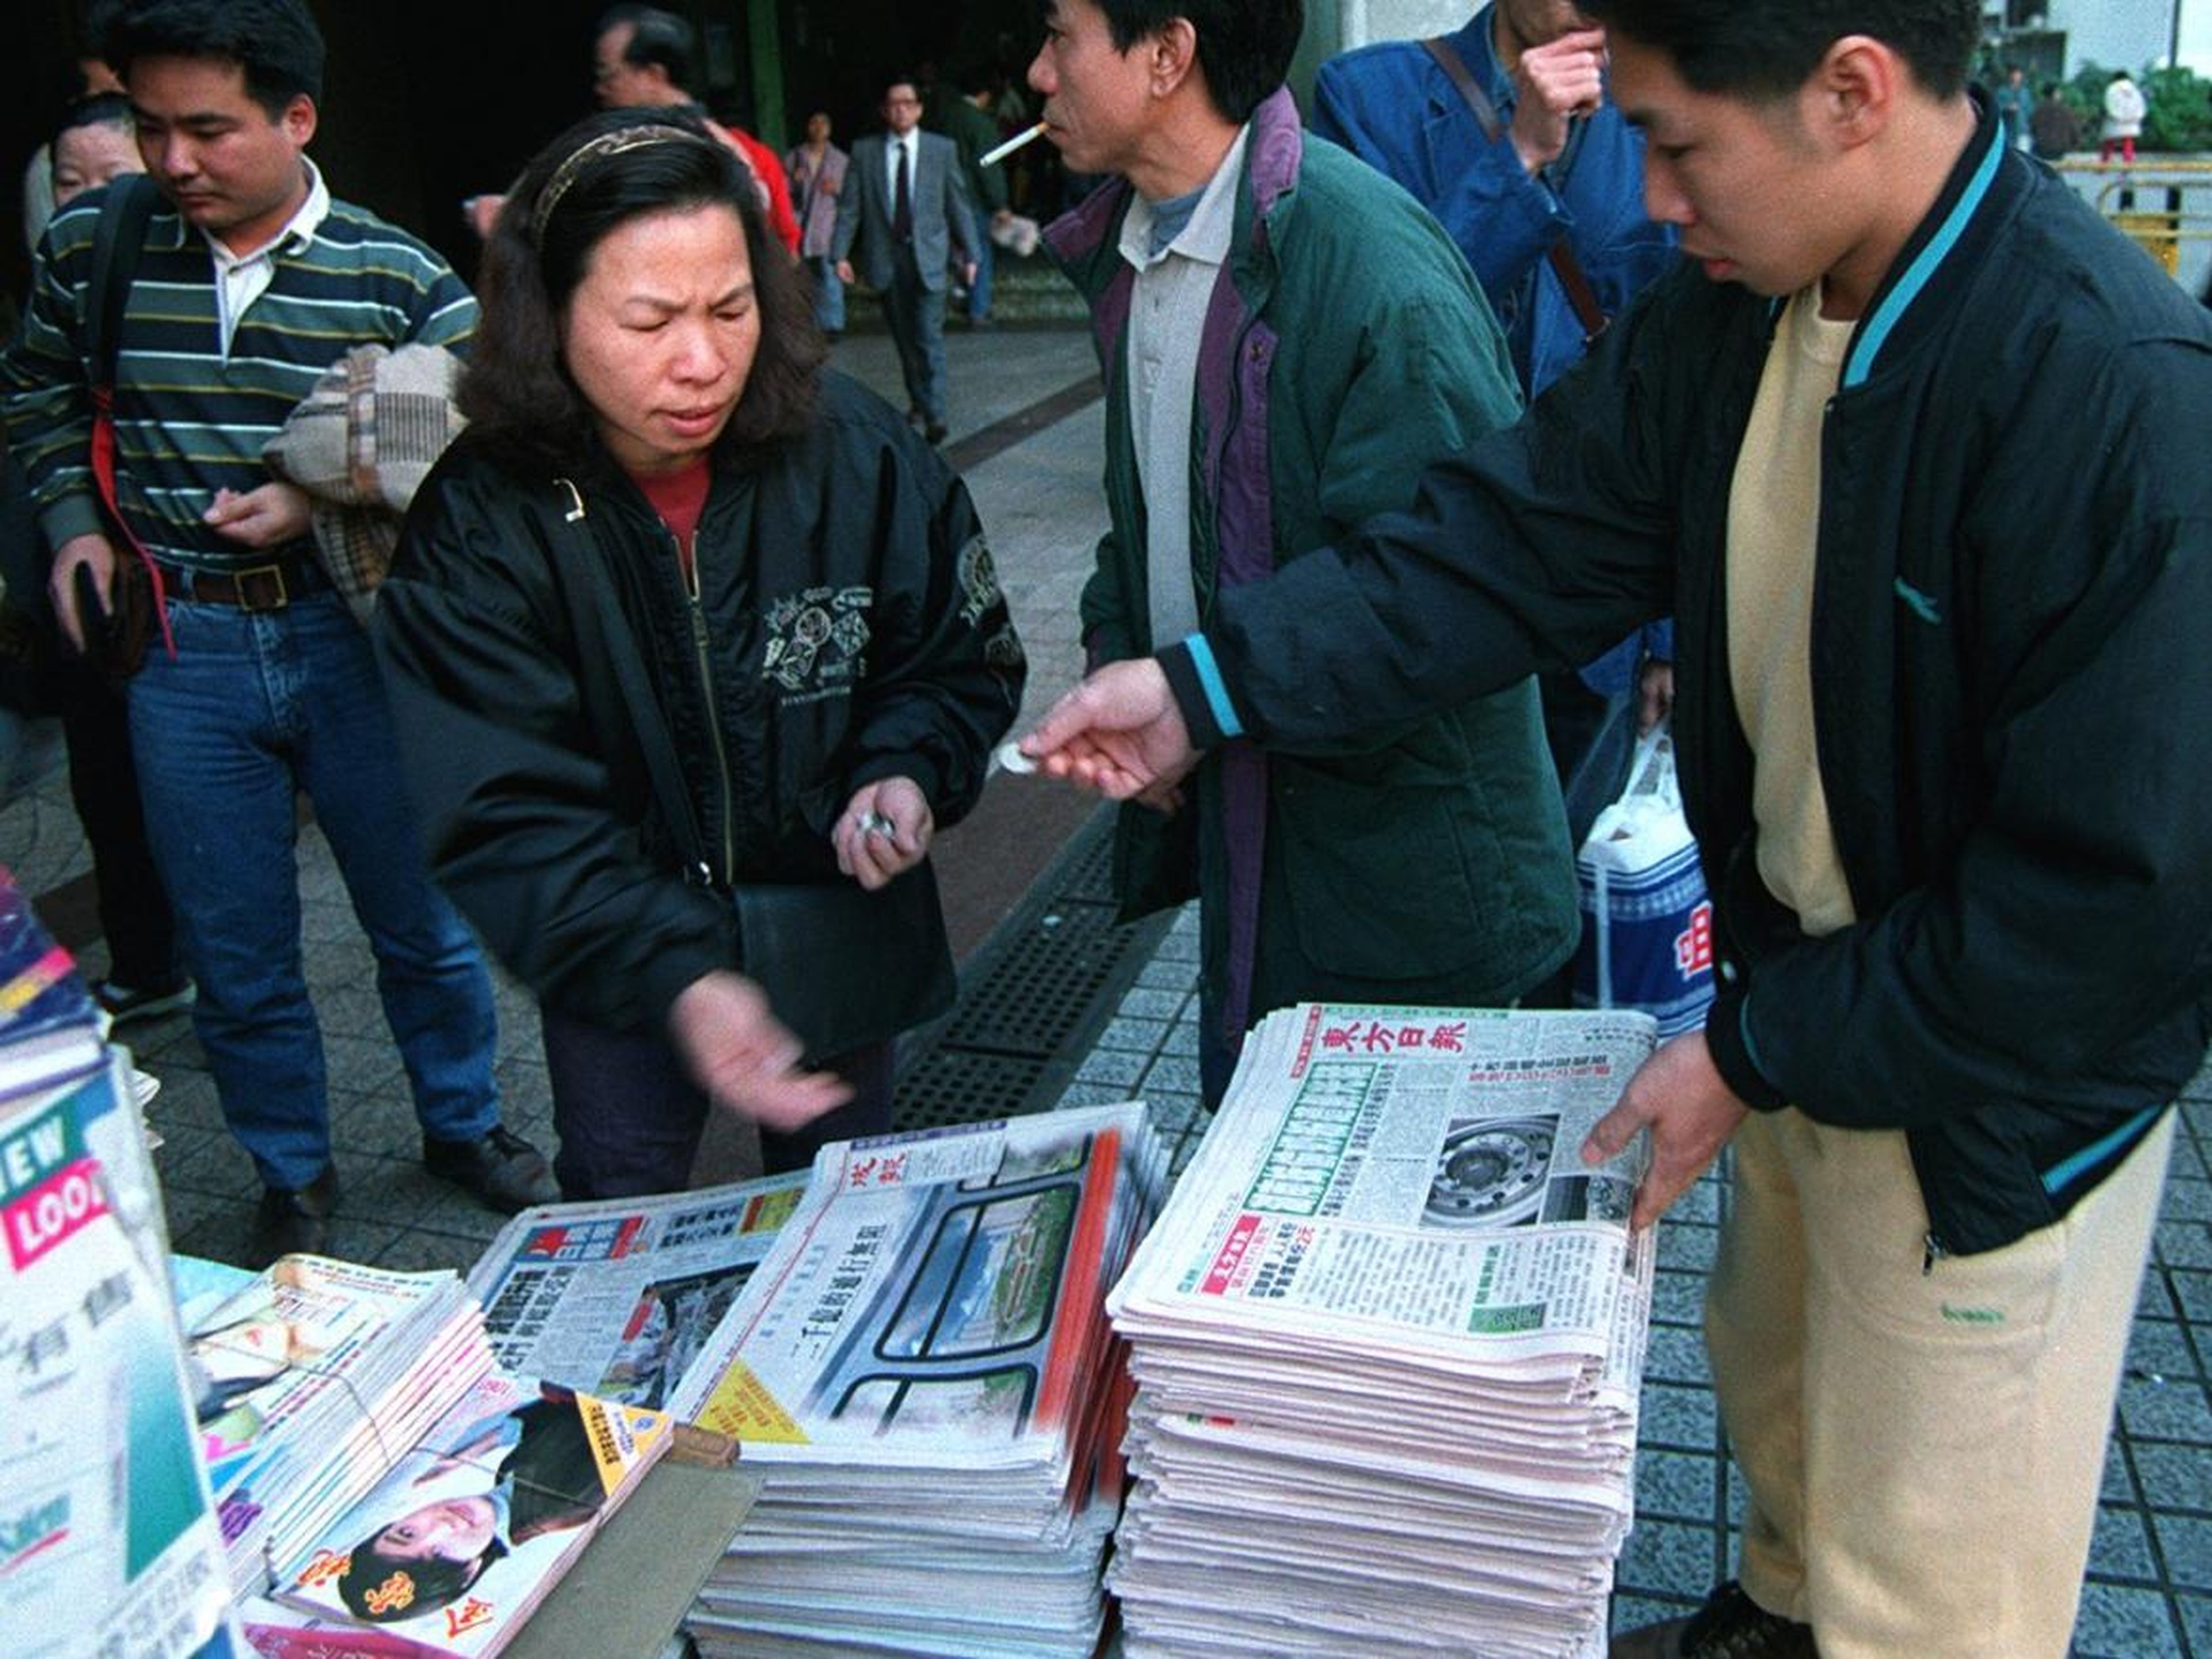 A Chinese newspaper vendor stall in December 1995.